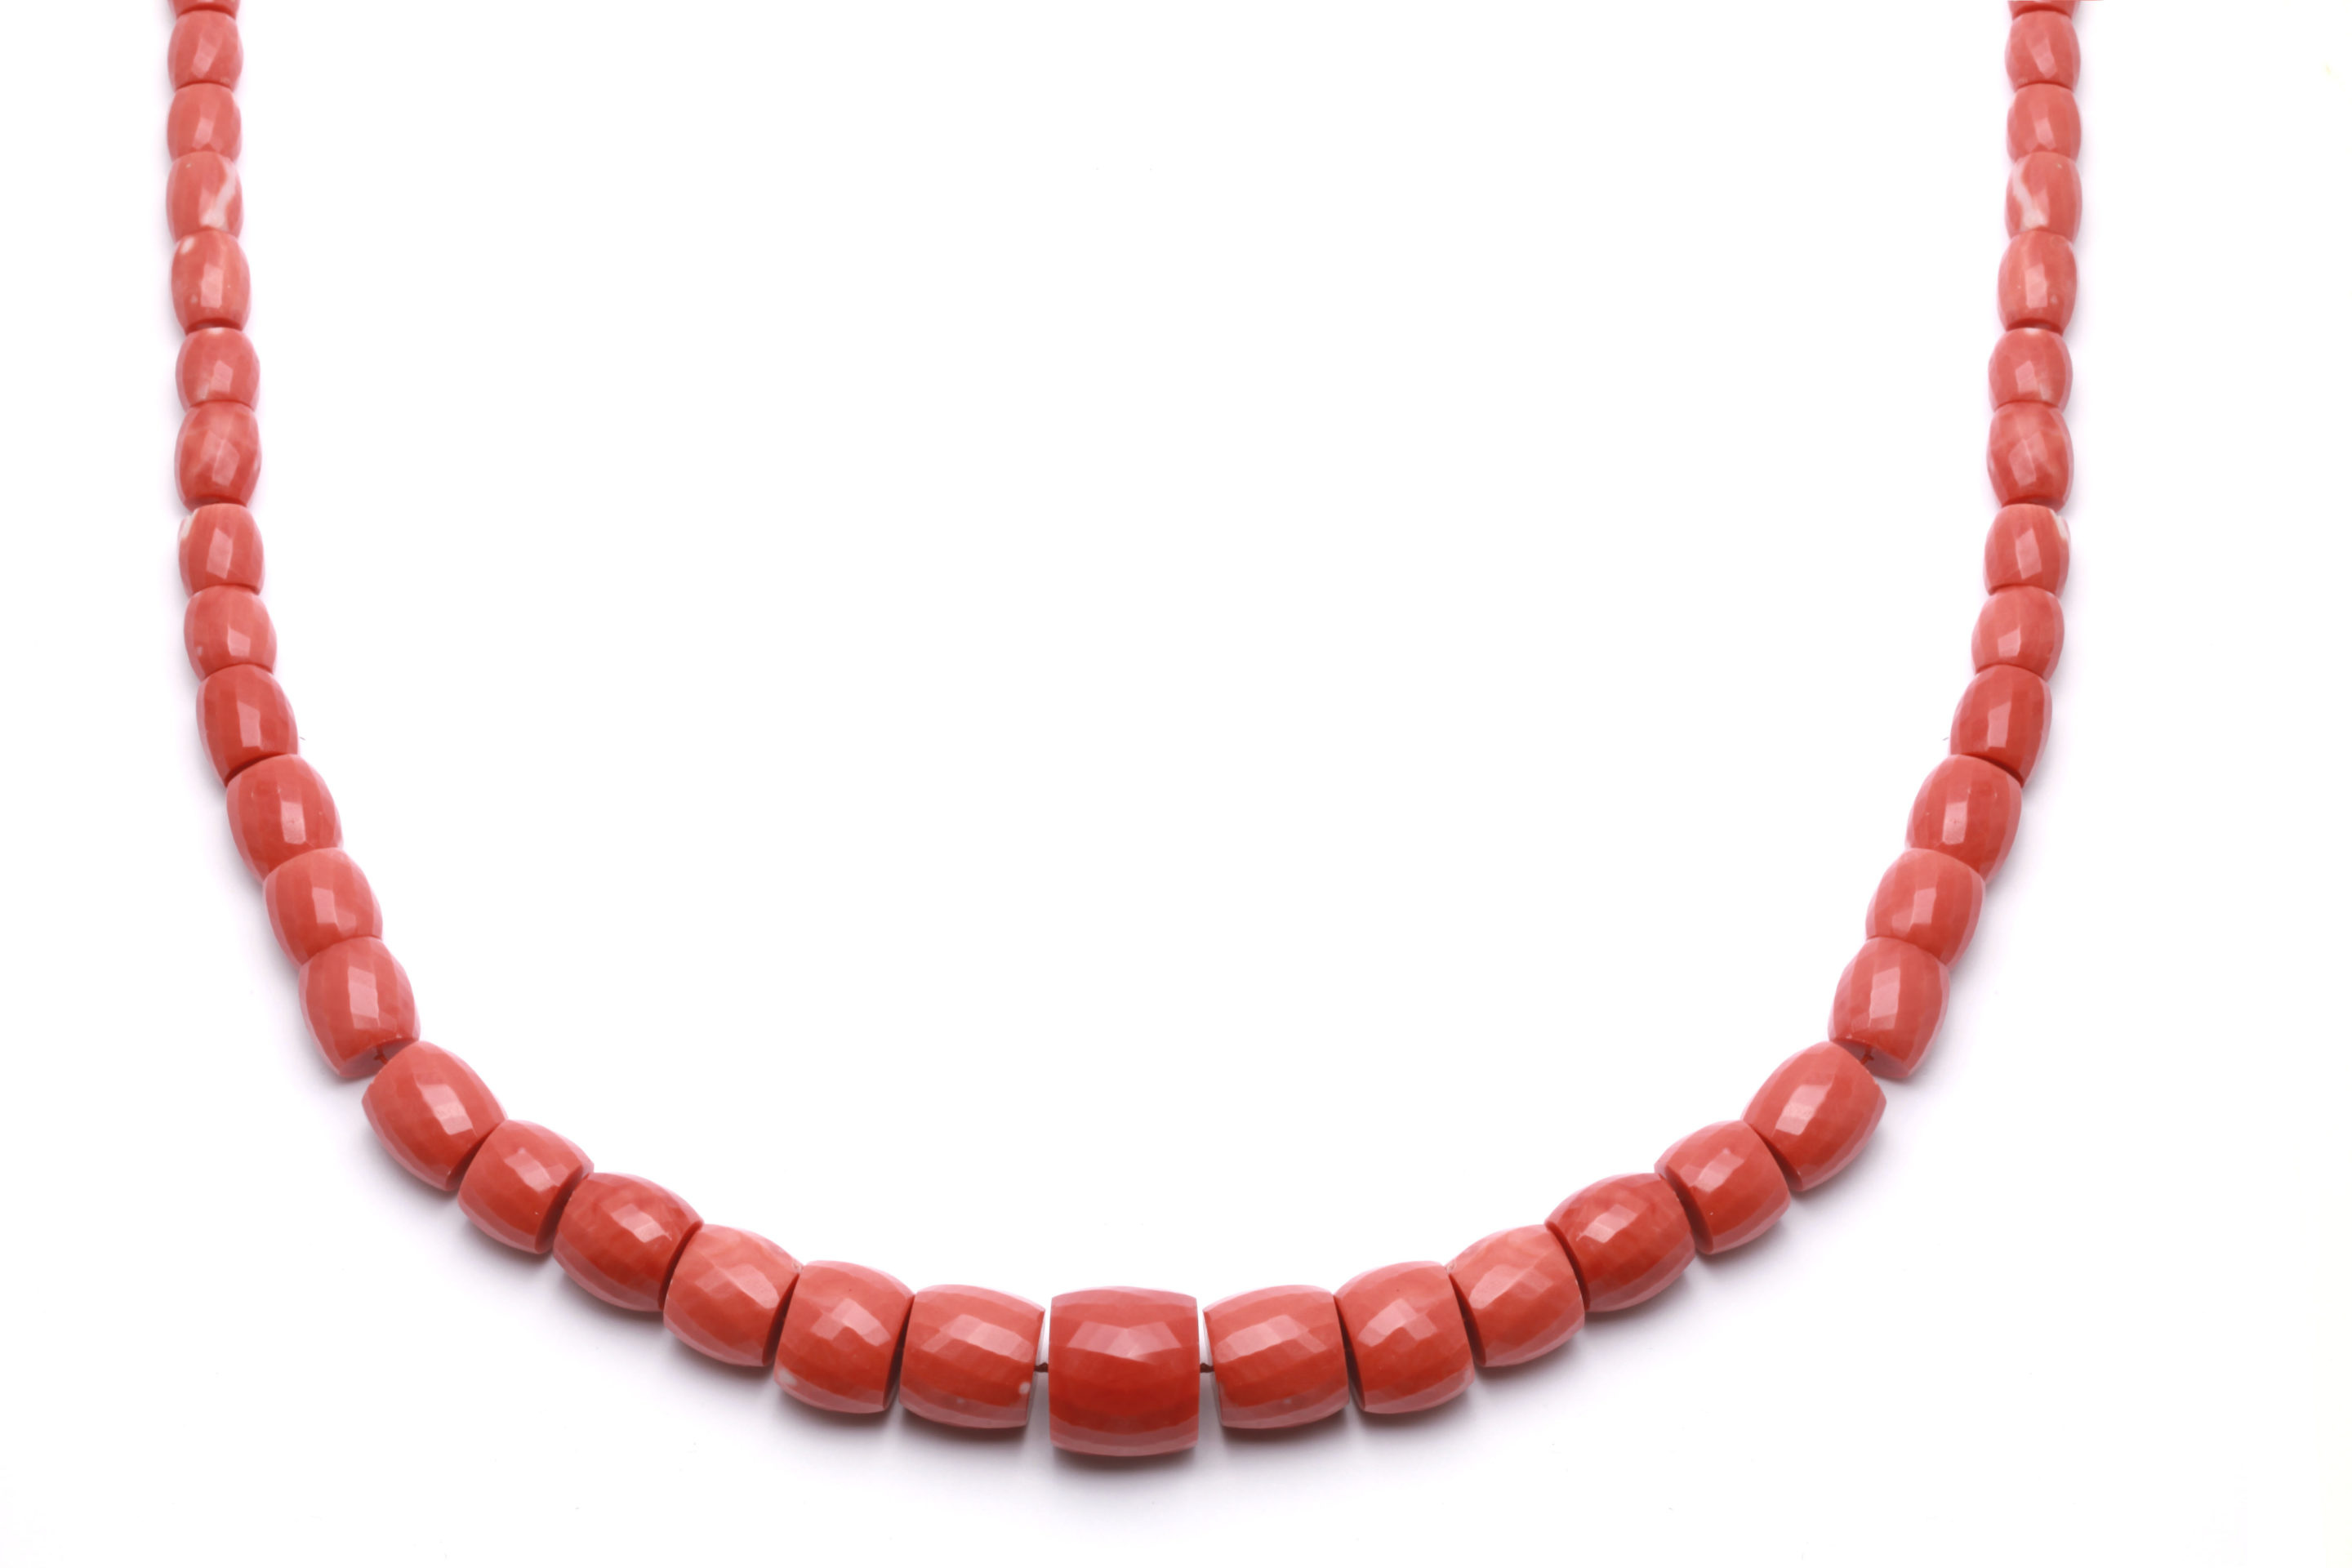 Red Coral, Sardinian coral necklace, Vibrant color, Natural beauty, 2880x1920 HD Desktop